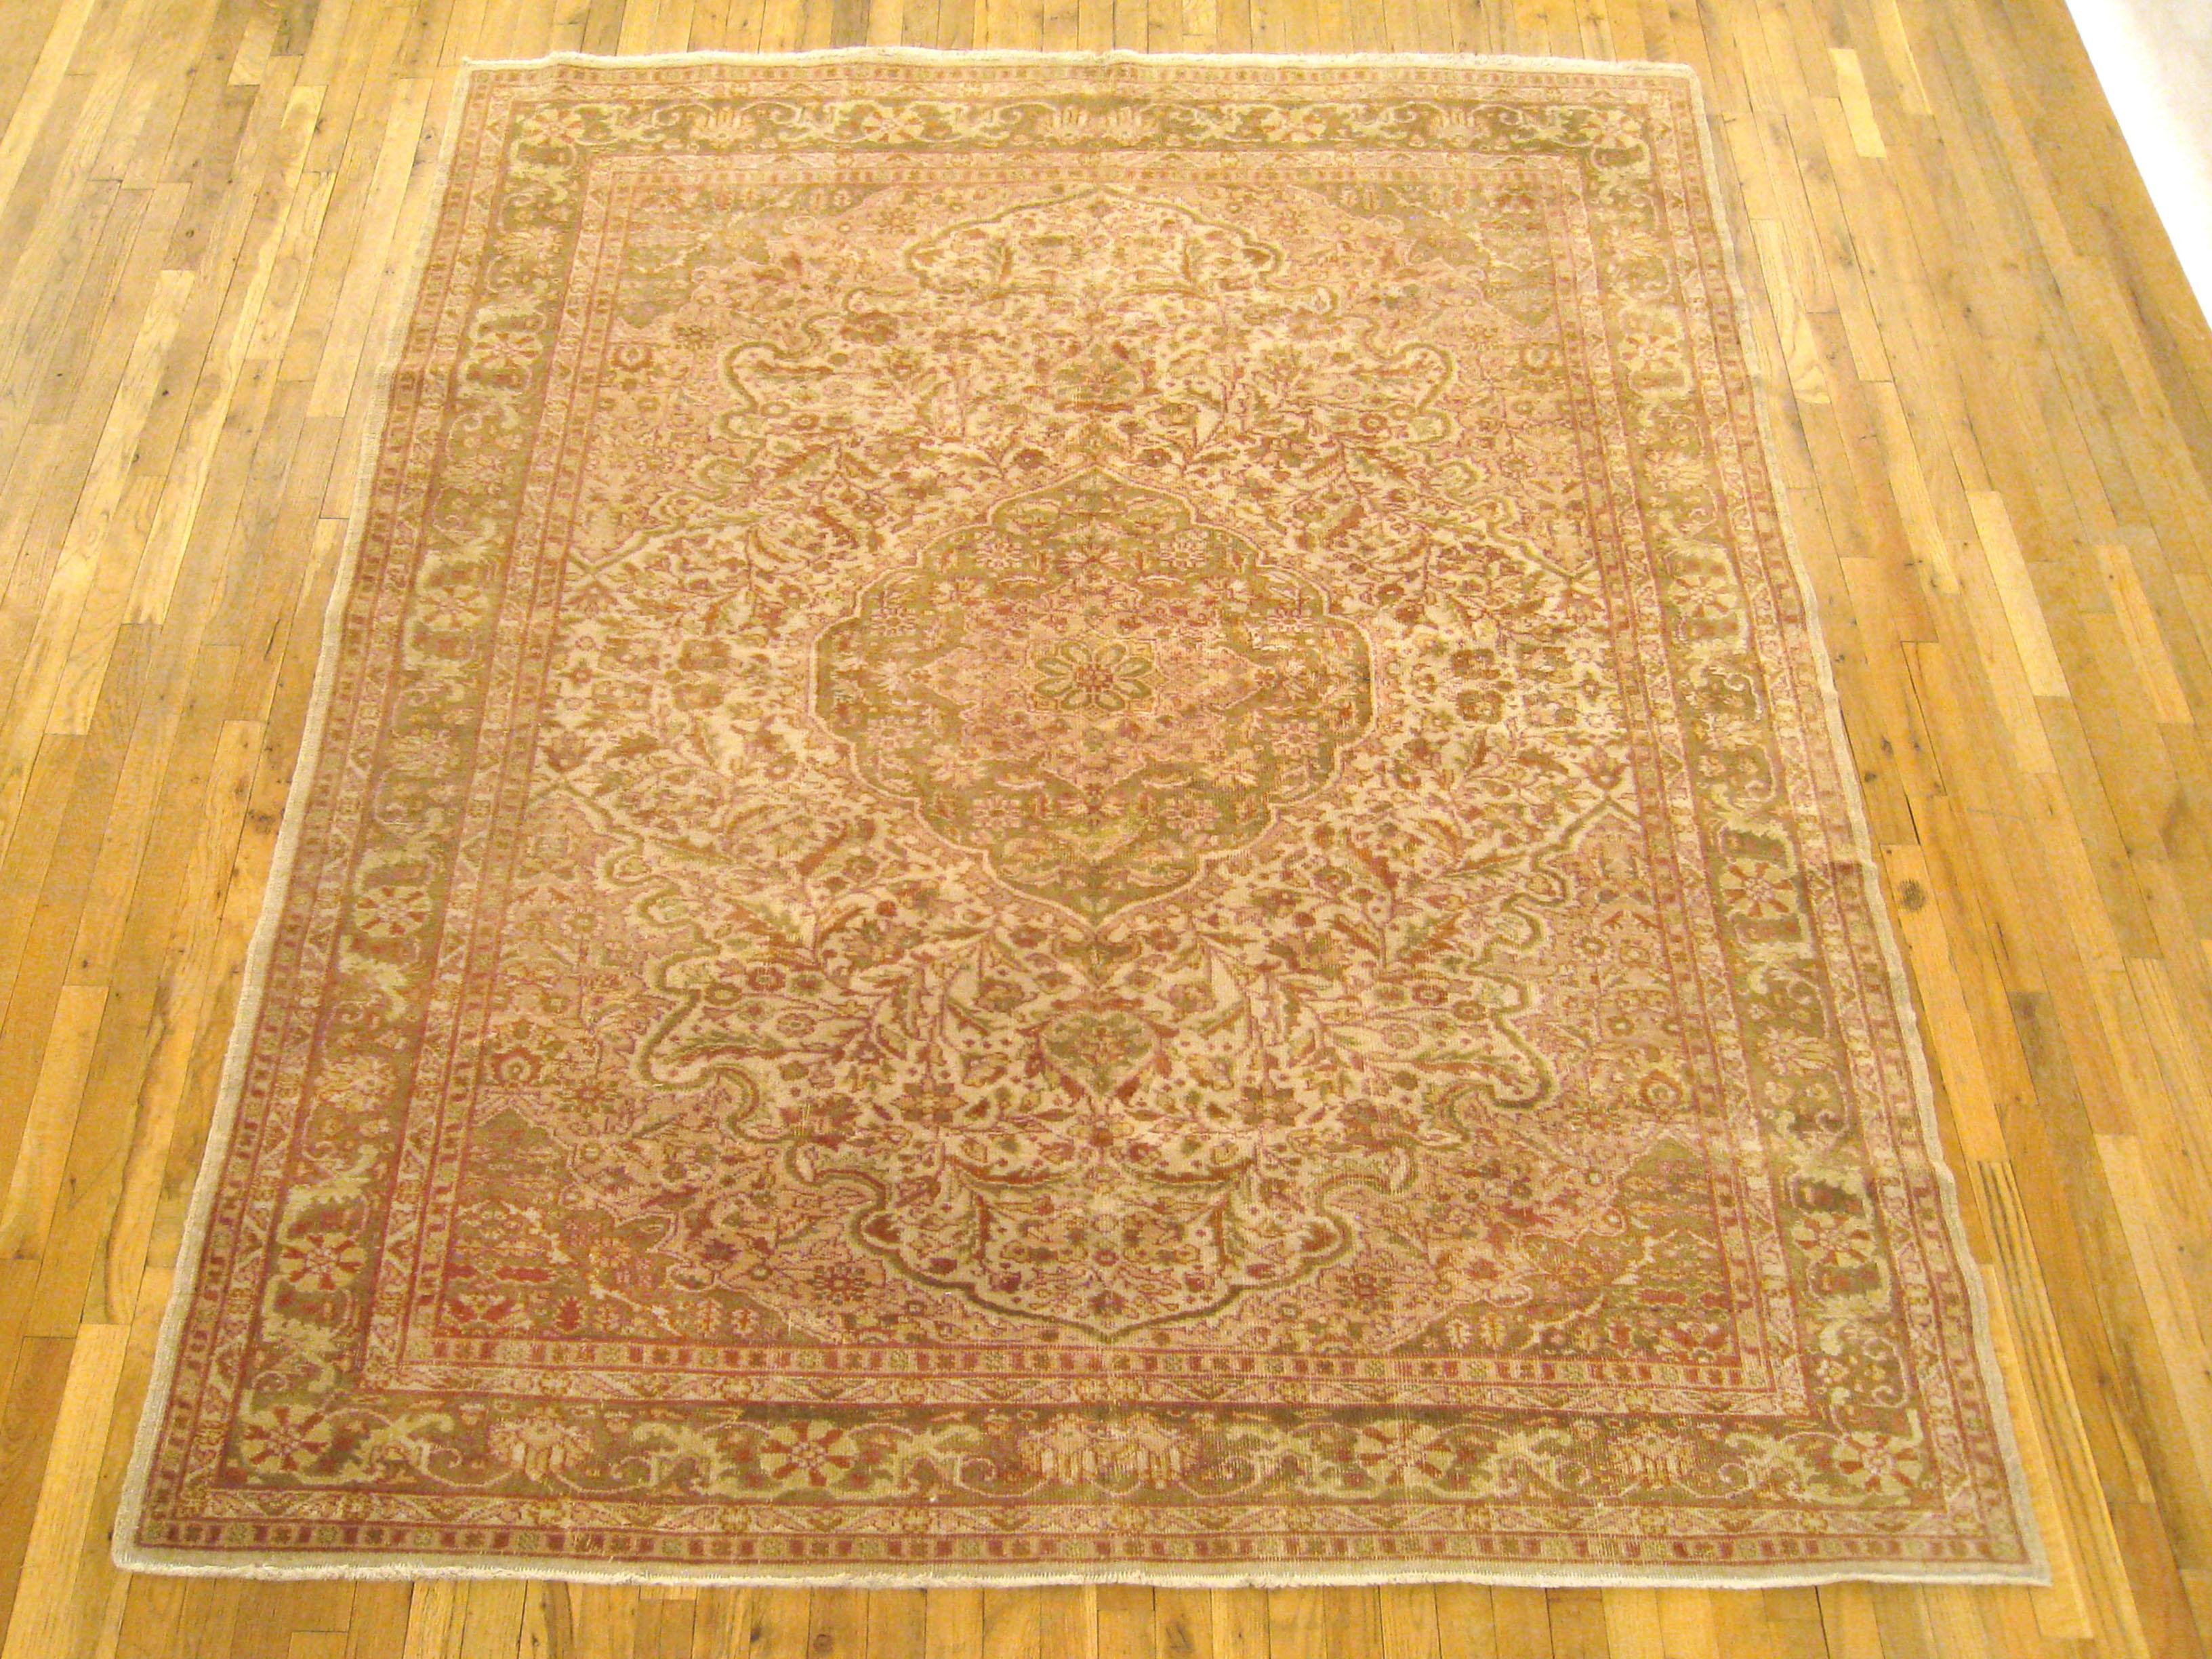 Vintage Turkish Turkish rug, Small size, circa 1900

A one-of-a-kind vintage Turkish Turkish Oriental Carpet, hand-knotted with soft wool pile. This beautiful rug features a central medallion in a covered ivory primary field, with an elegant green